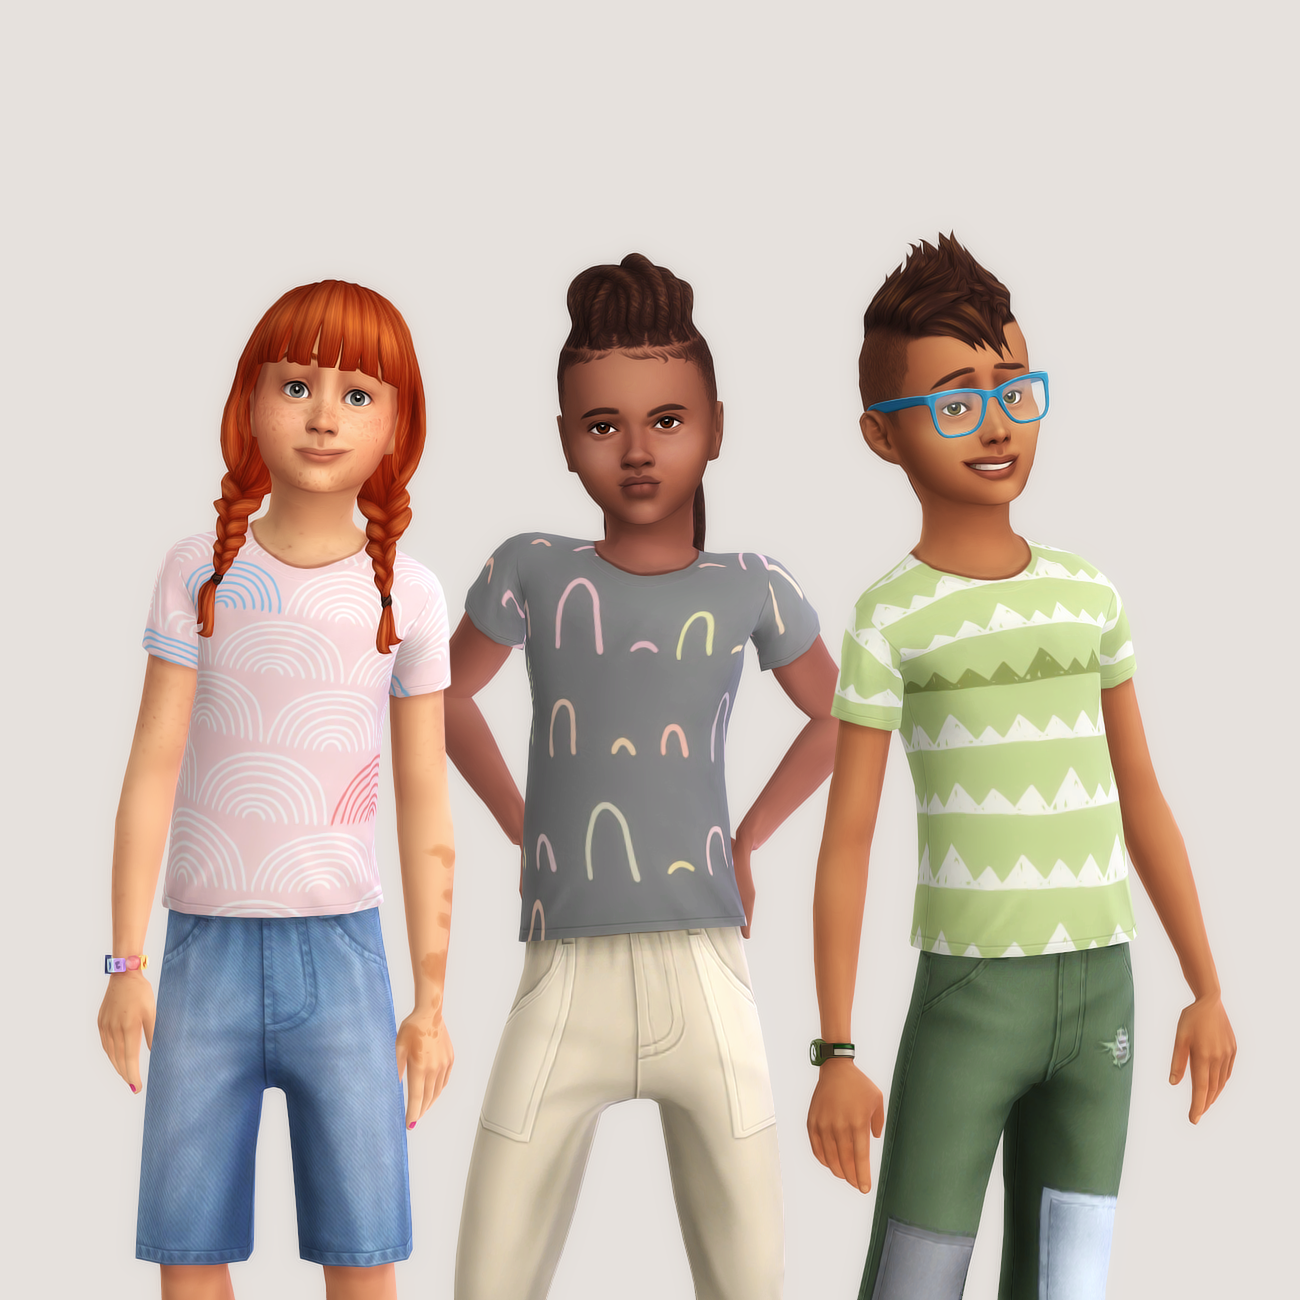 Kids Pitter Patterned Tshirt - The Sims 4 Create a Sim - CurseForge